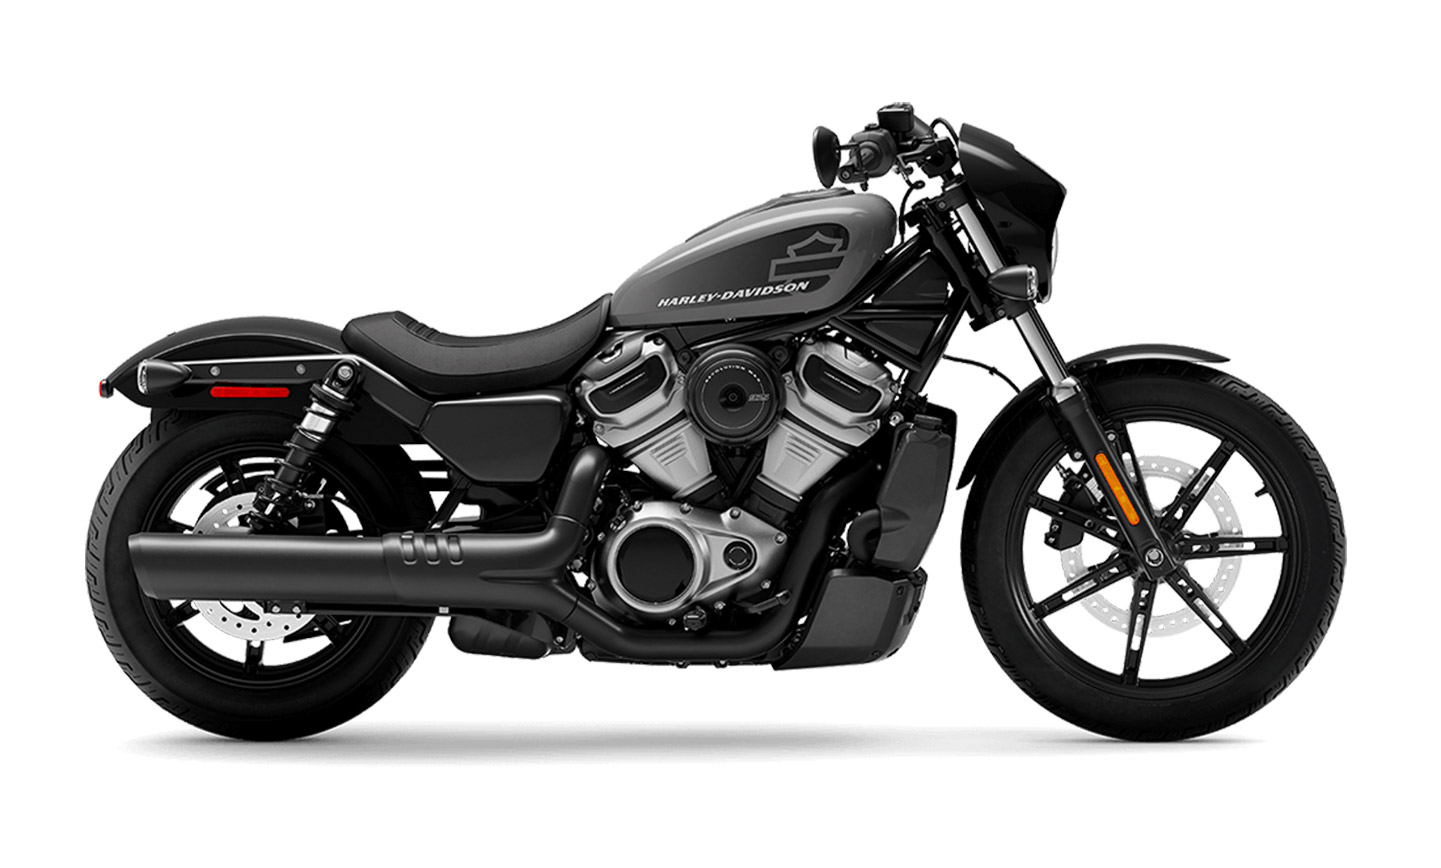 Stock profile image of the Nightster